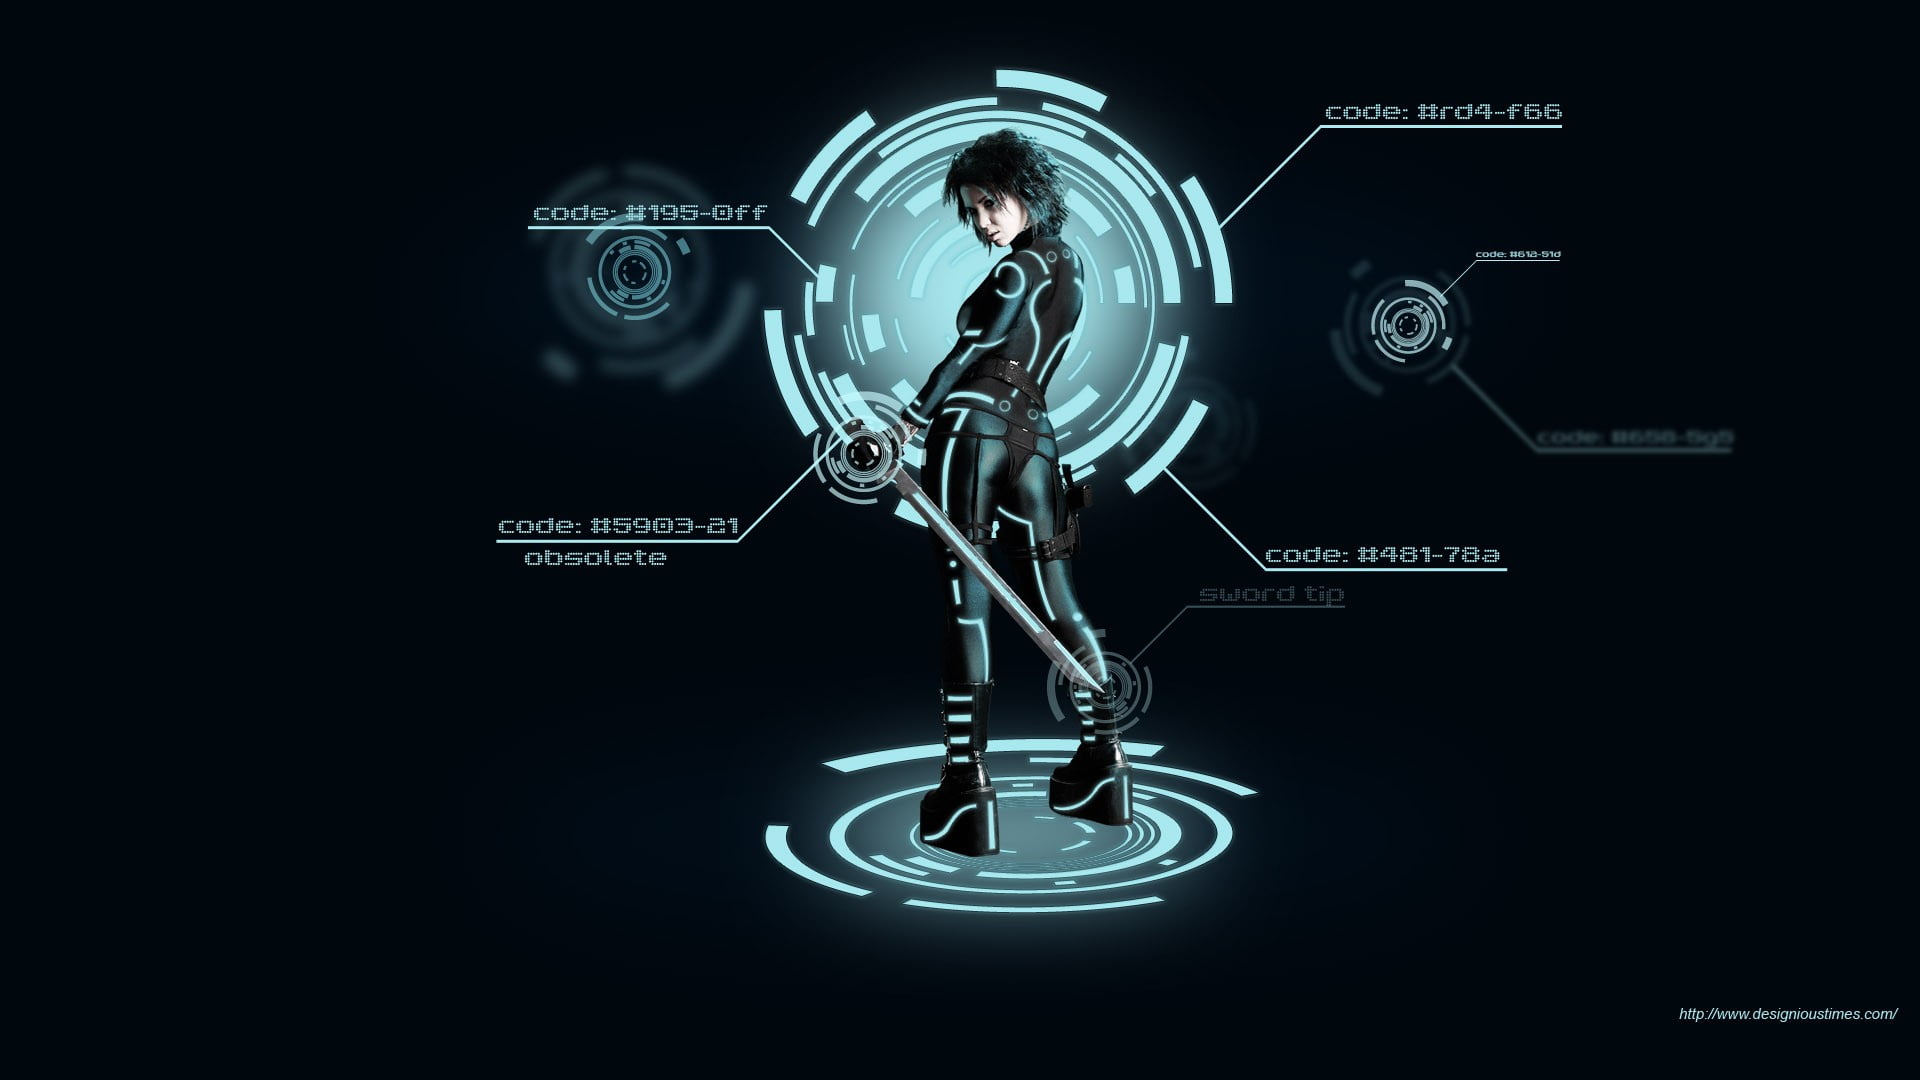 Tron character illustration, Tron: Legacy, movies, technology